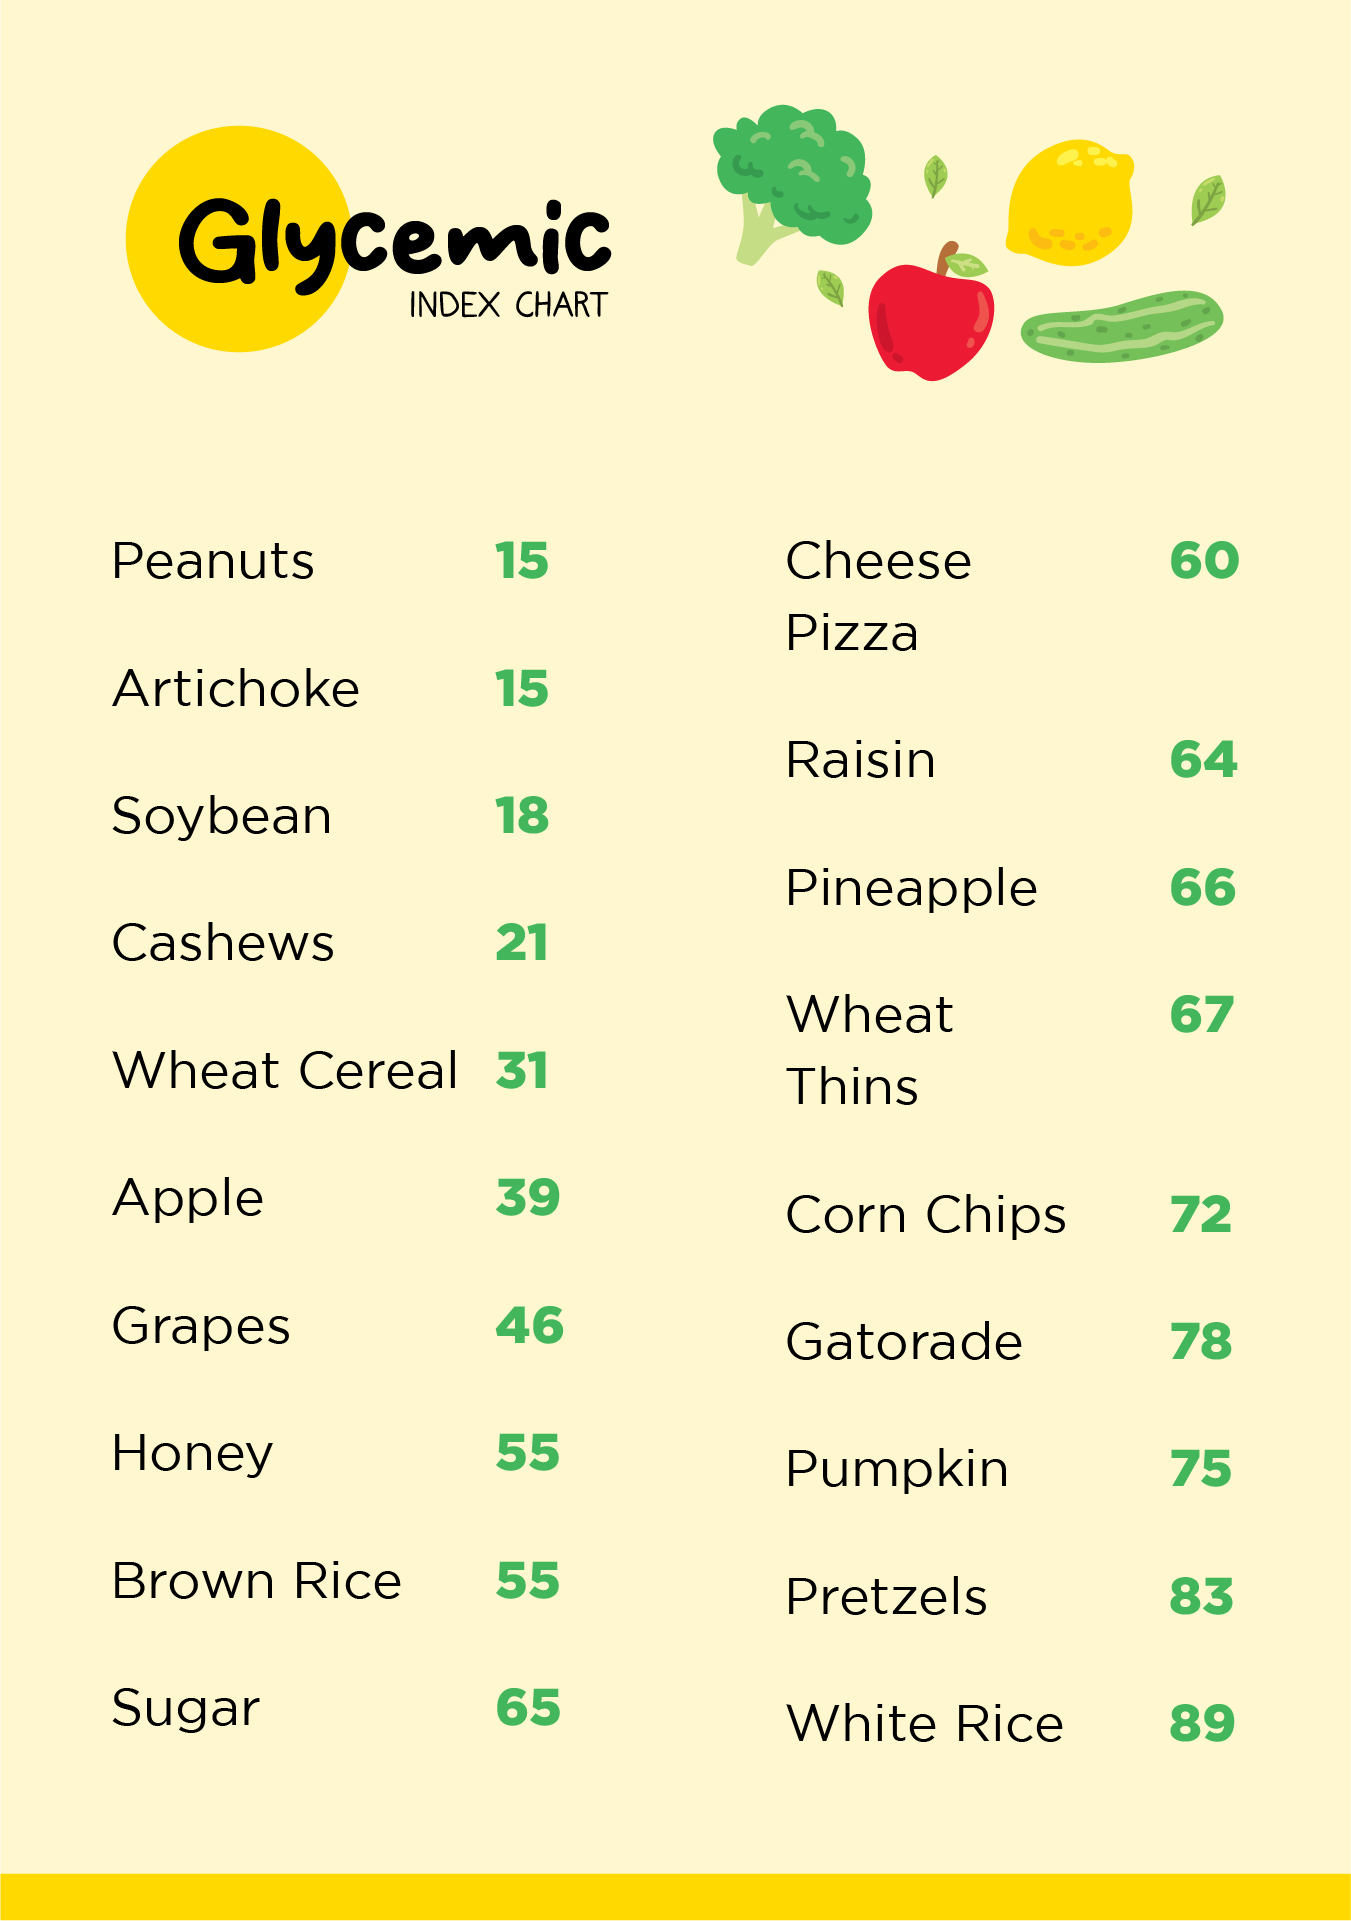 Low Glycemic Foods List Guide Printable